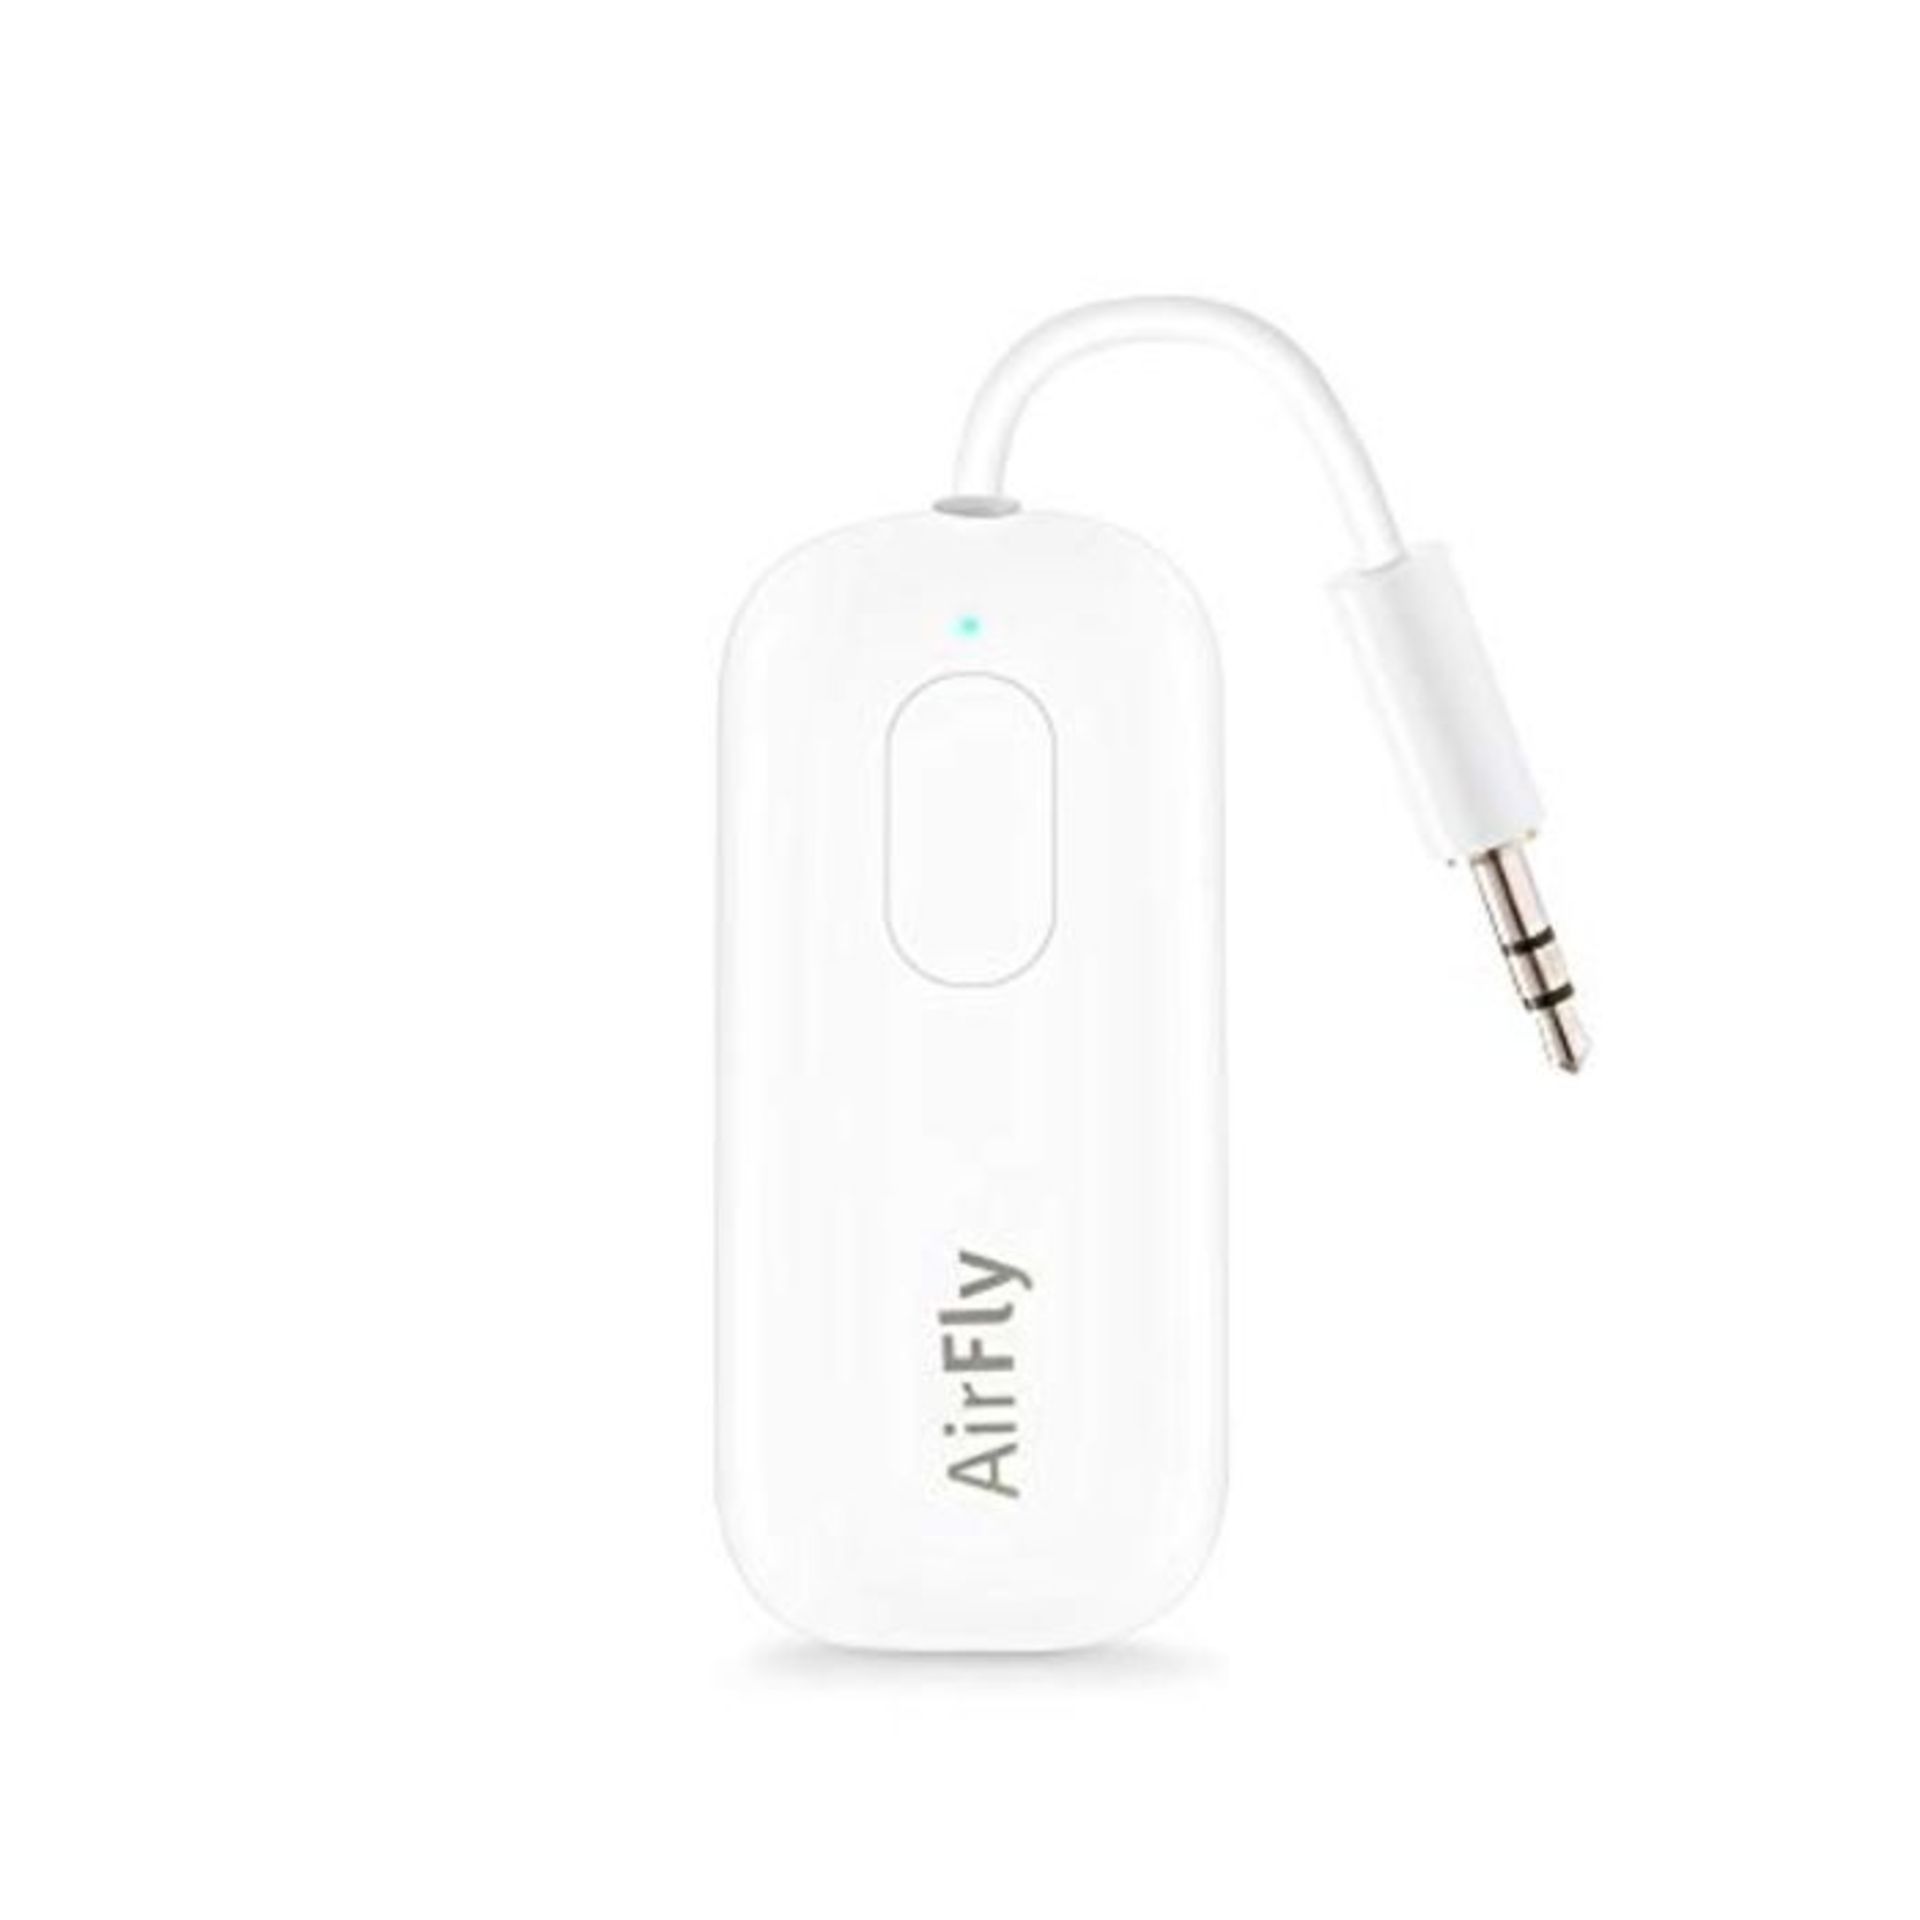 Twelve South AirFly Pro | Wireless Transmitter/Receiver with Audio Sharing for Up to 2